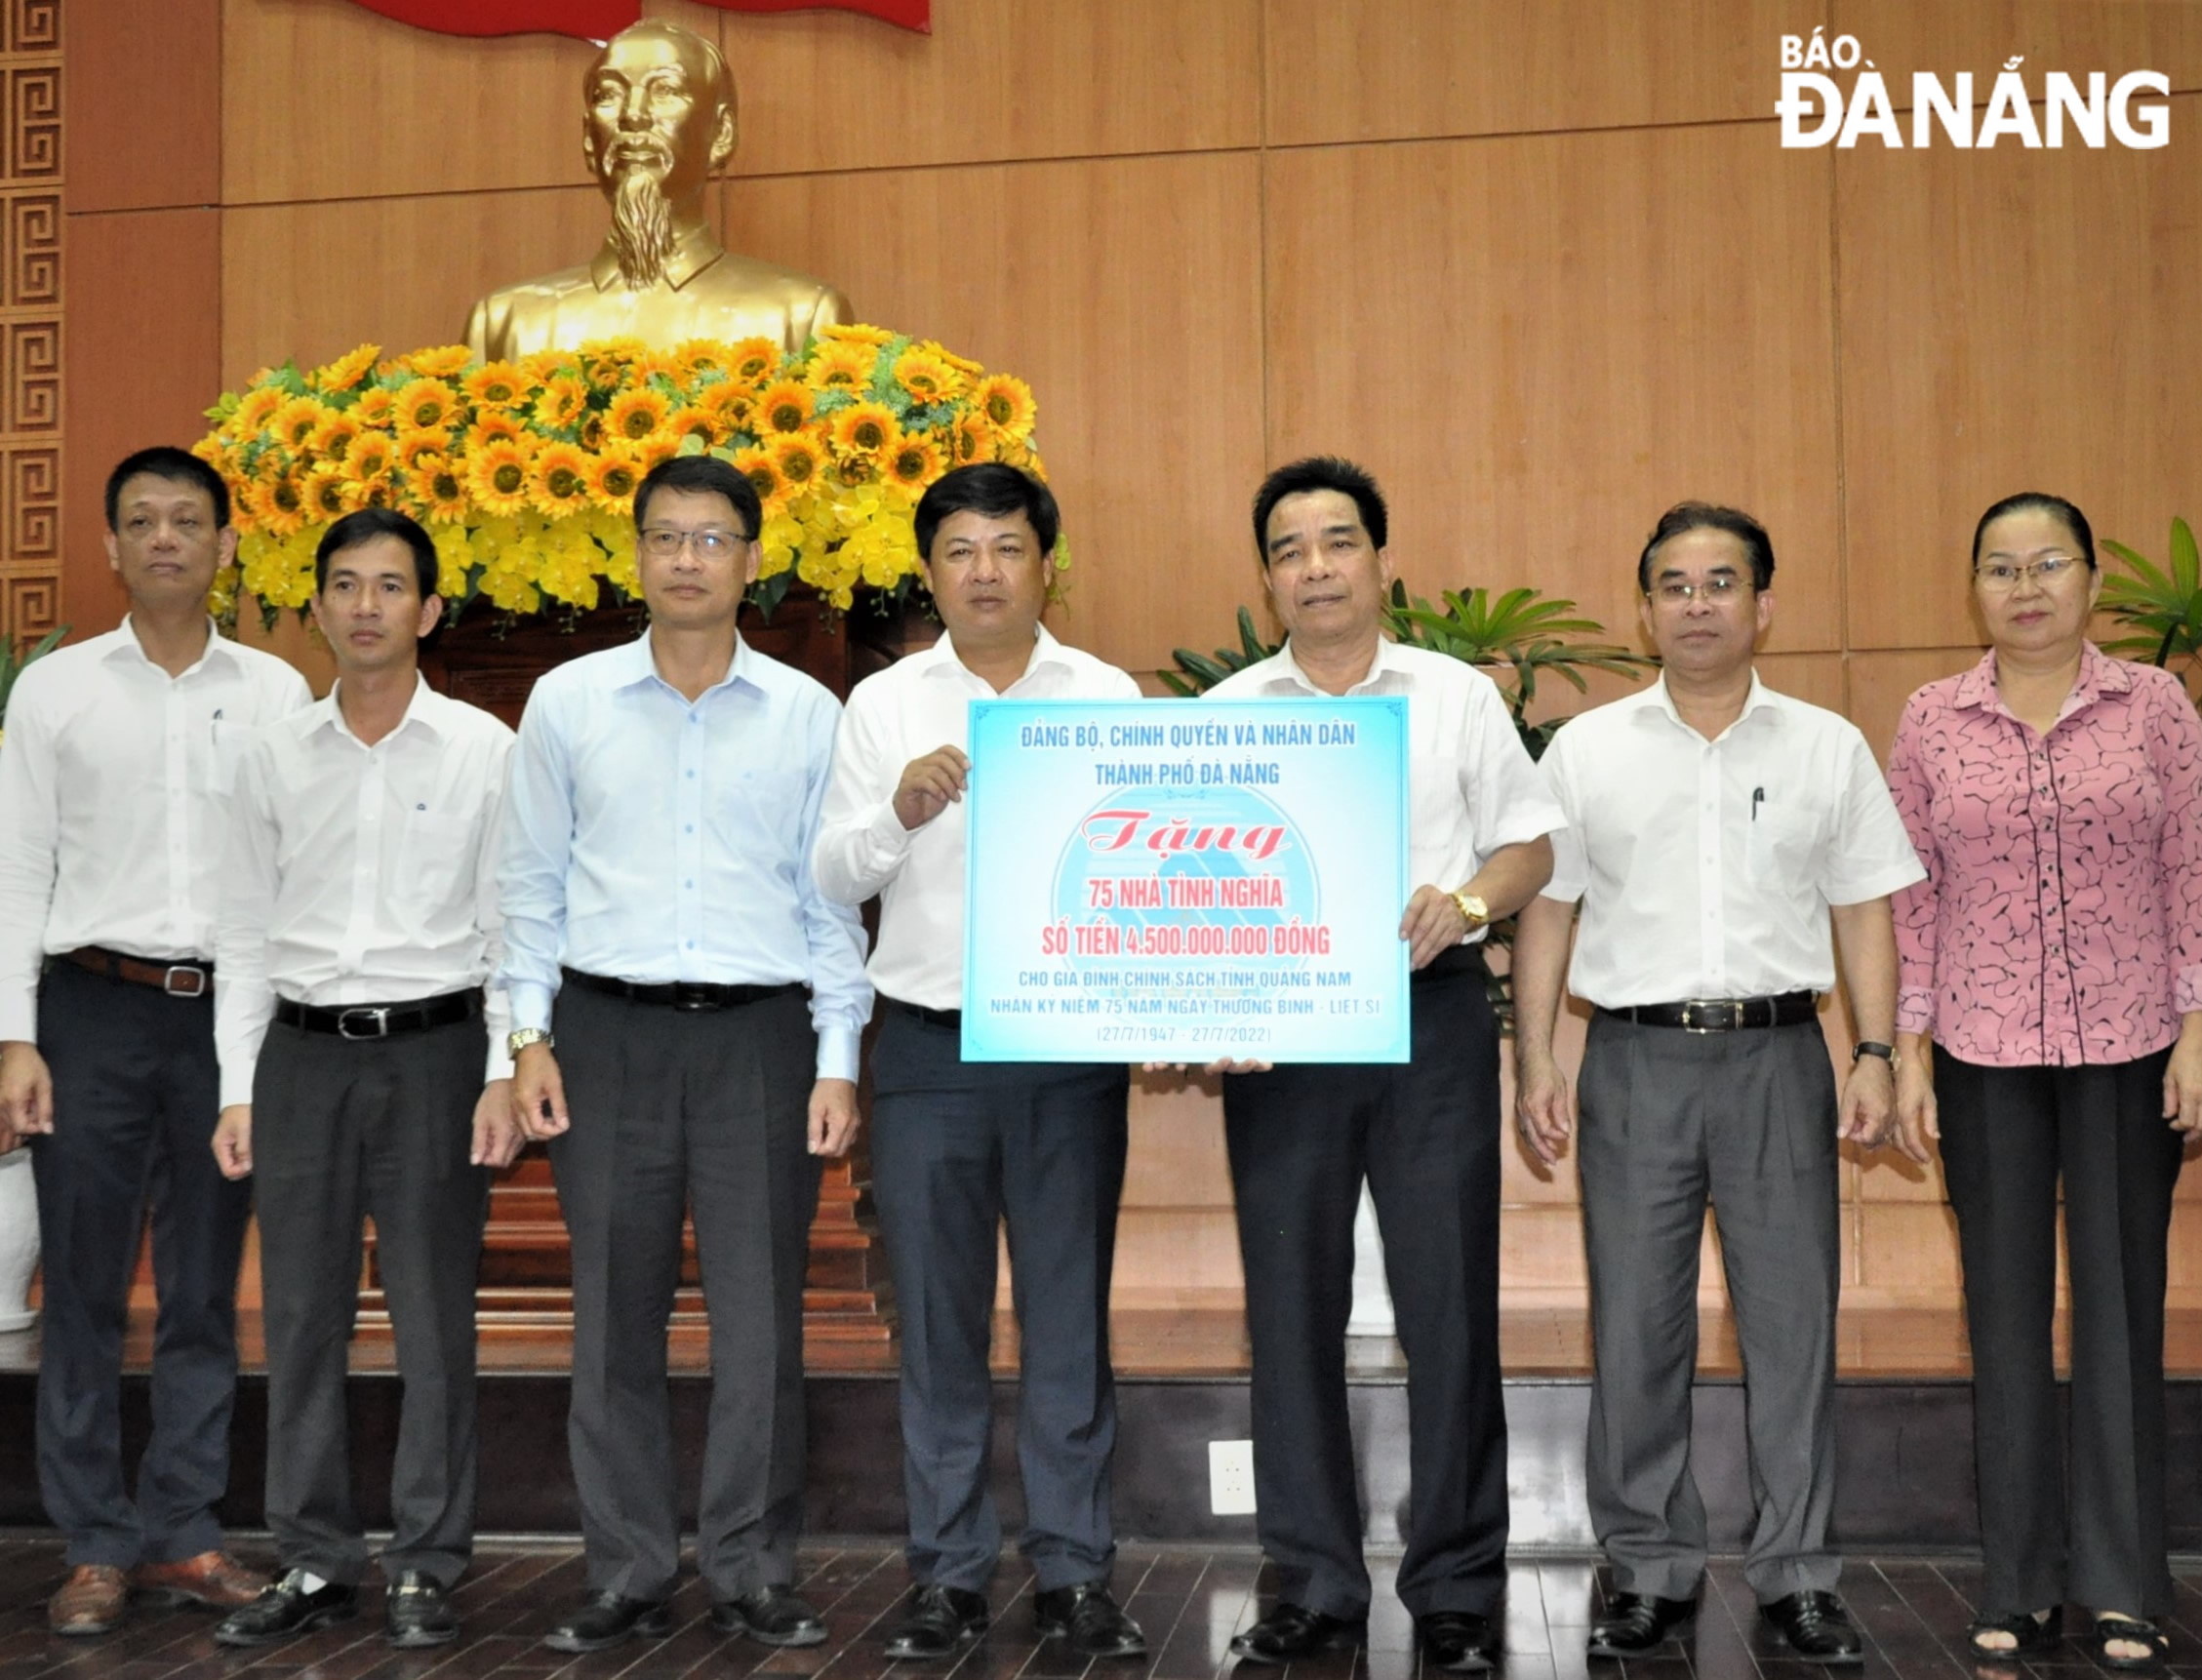 Da Nang Party Committee Deputy Secretary Luong Nguyen Minh Triet (centre) handing over the symbolic board of 75 'gratitude houses' to social policy families in Quang Nam Province. Photo: LE HUNG